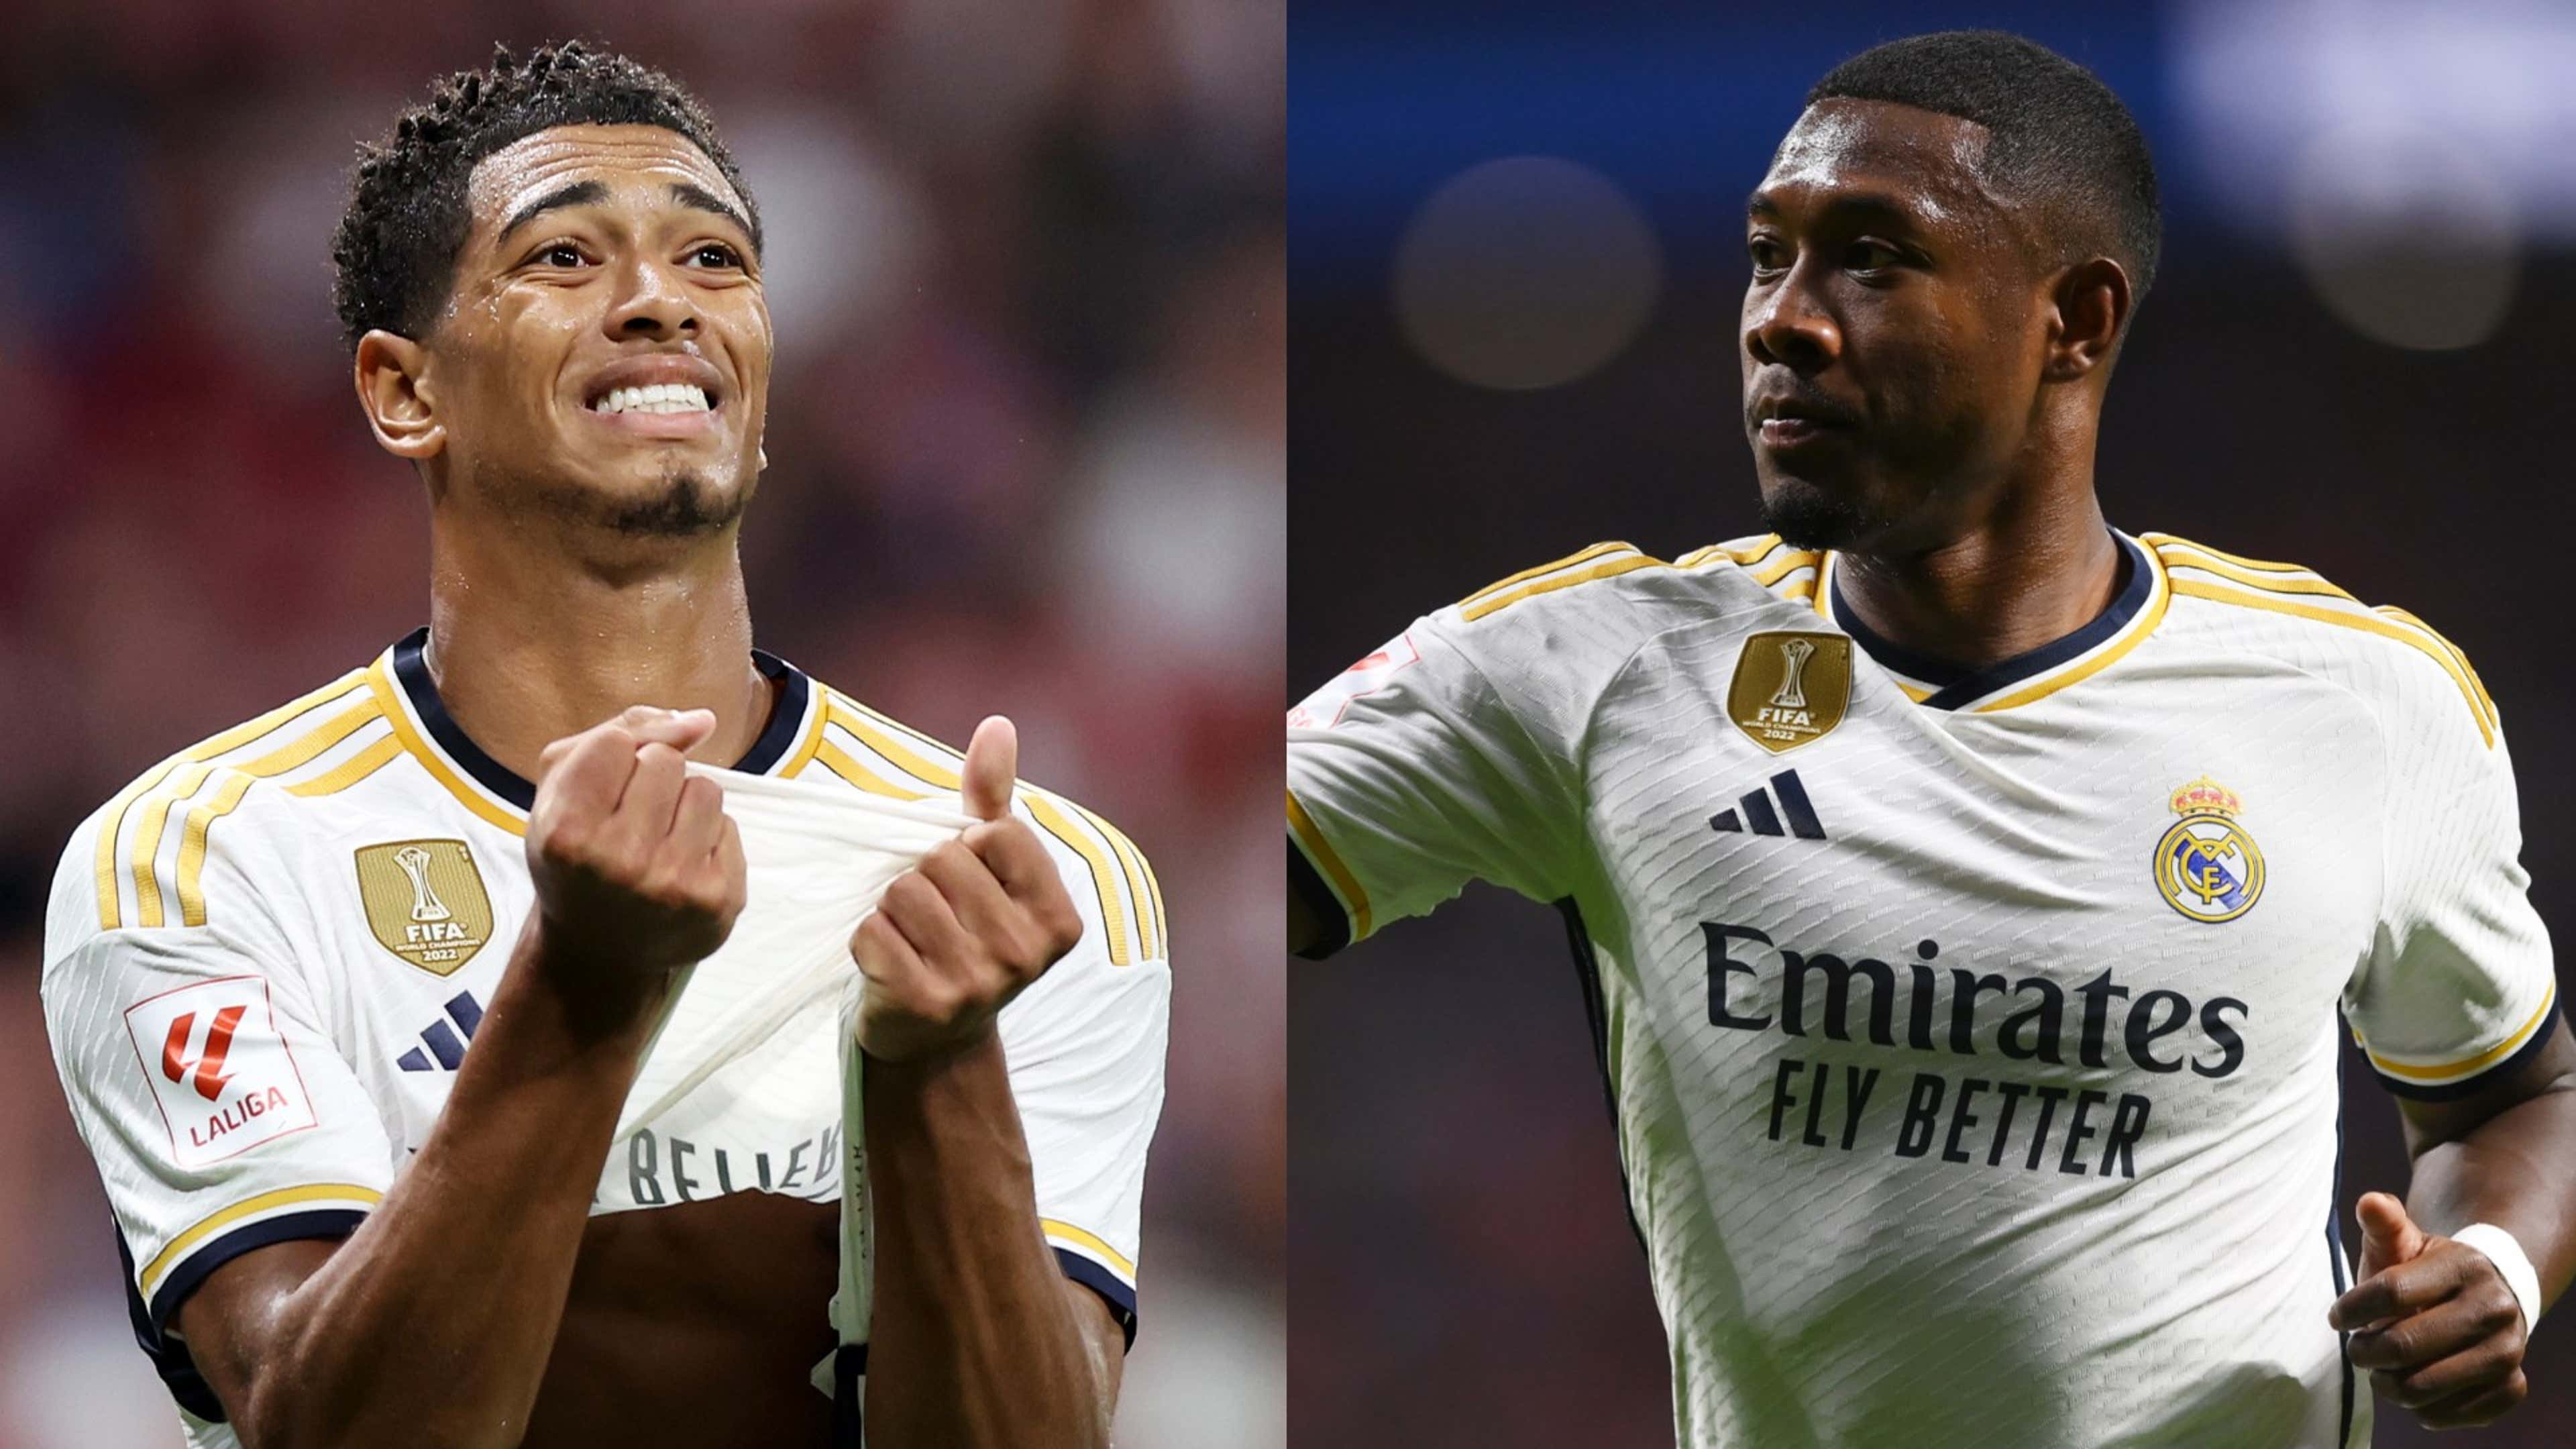 Can Real Madrid bounce back against Arsenal tonight?